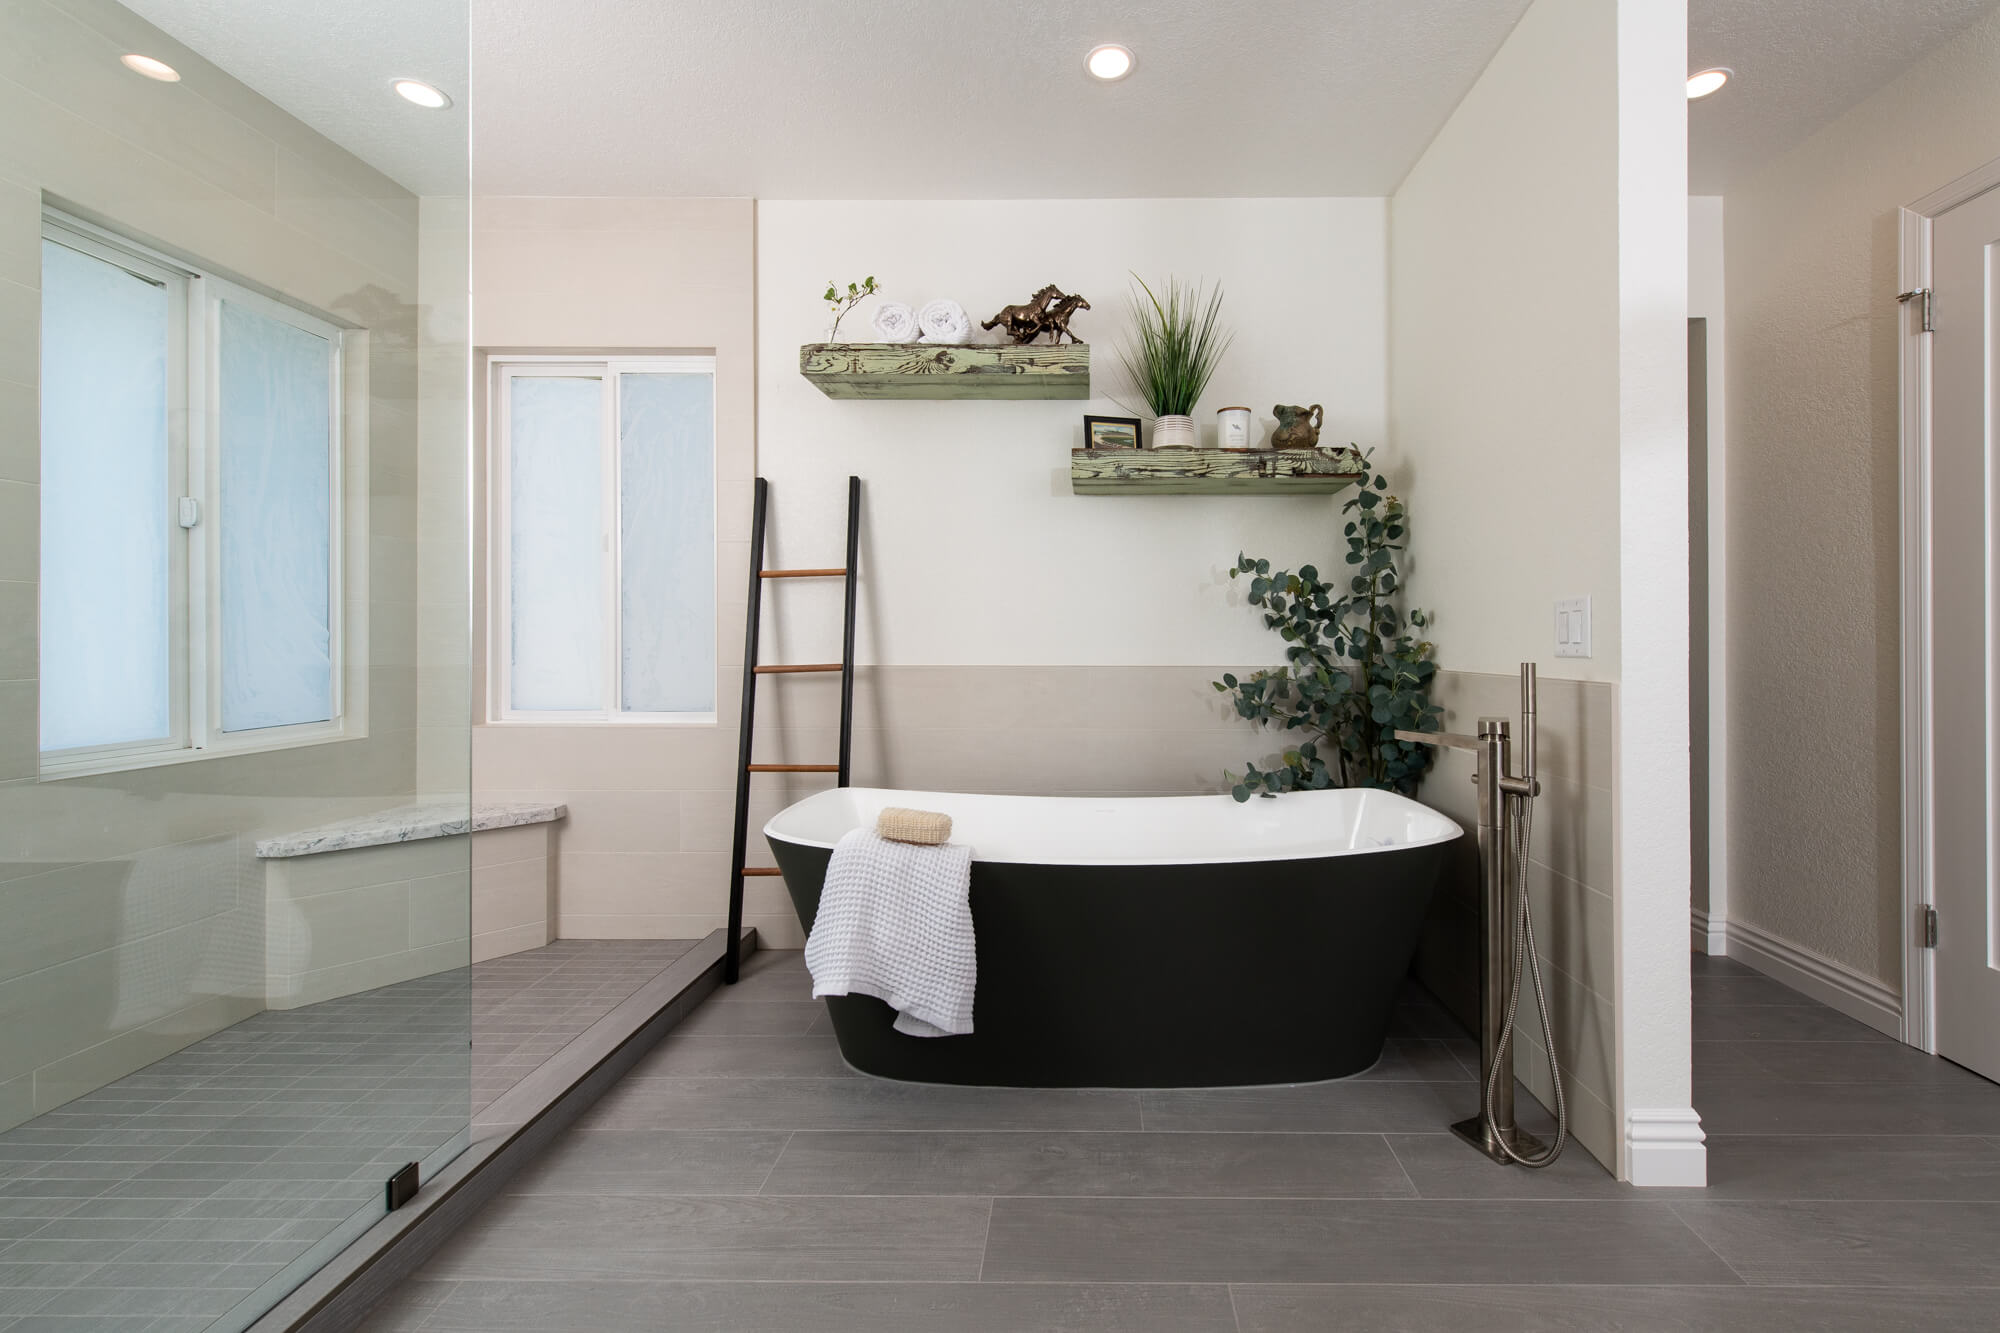 Primary-bathroom-remodel-with-large-walk-in-shower-and-freestanding-tub - bathroom design trends